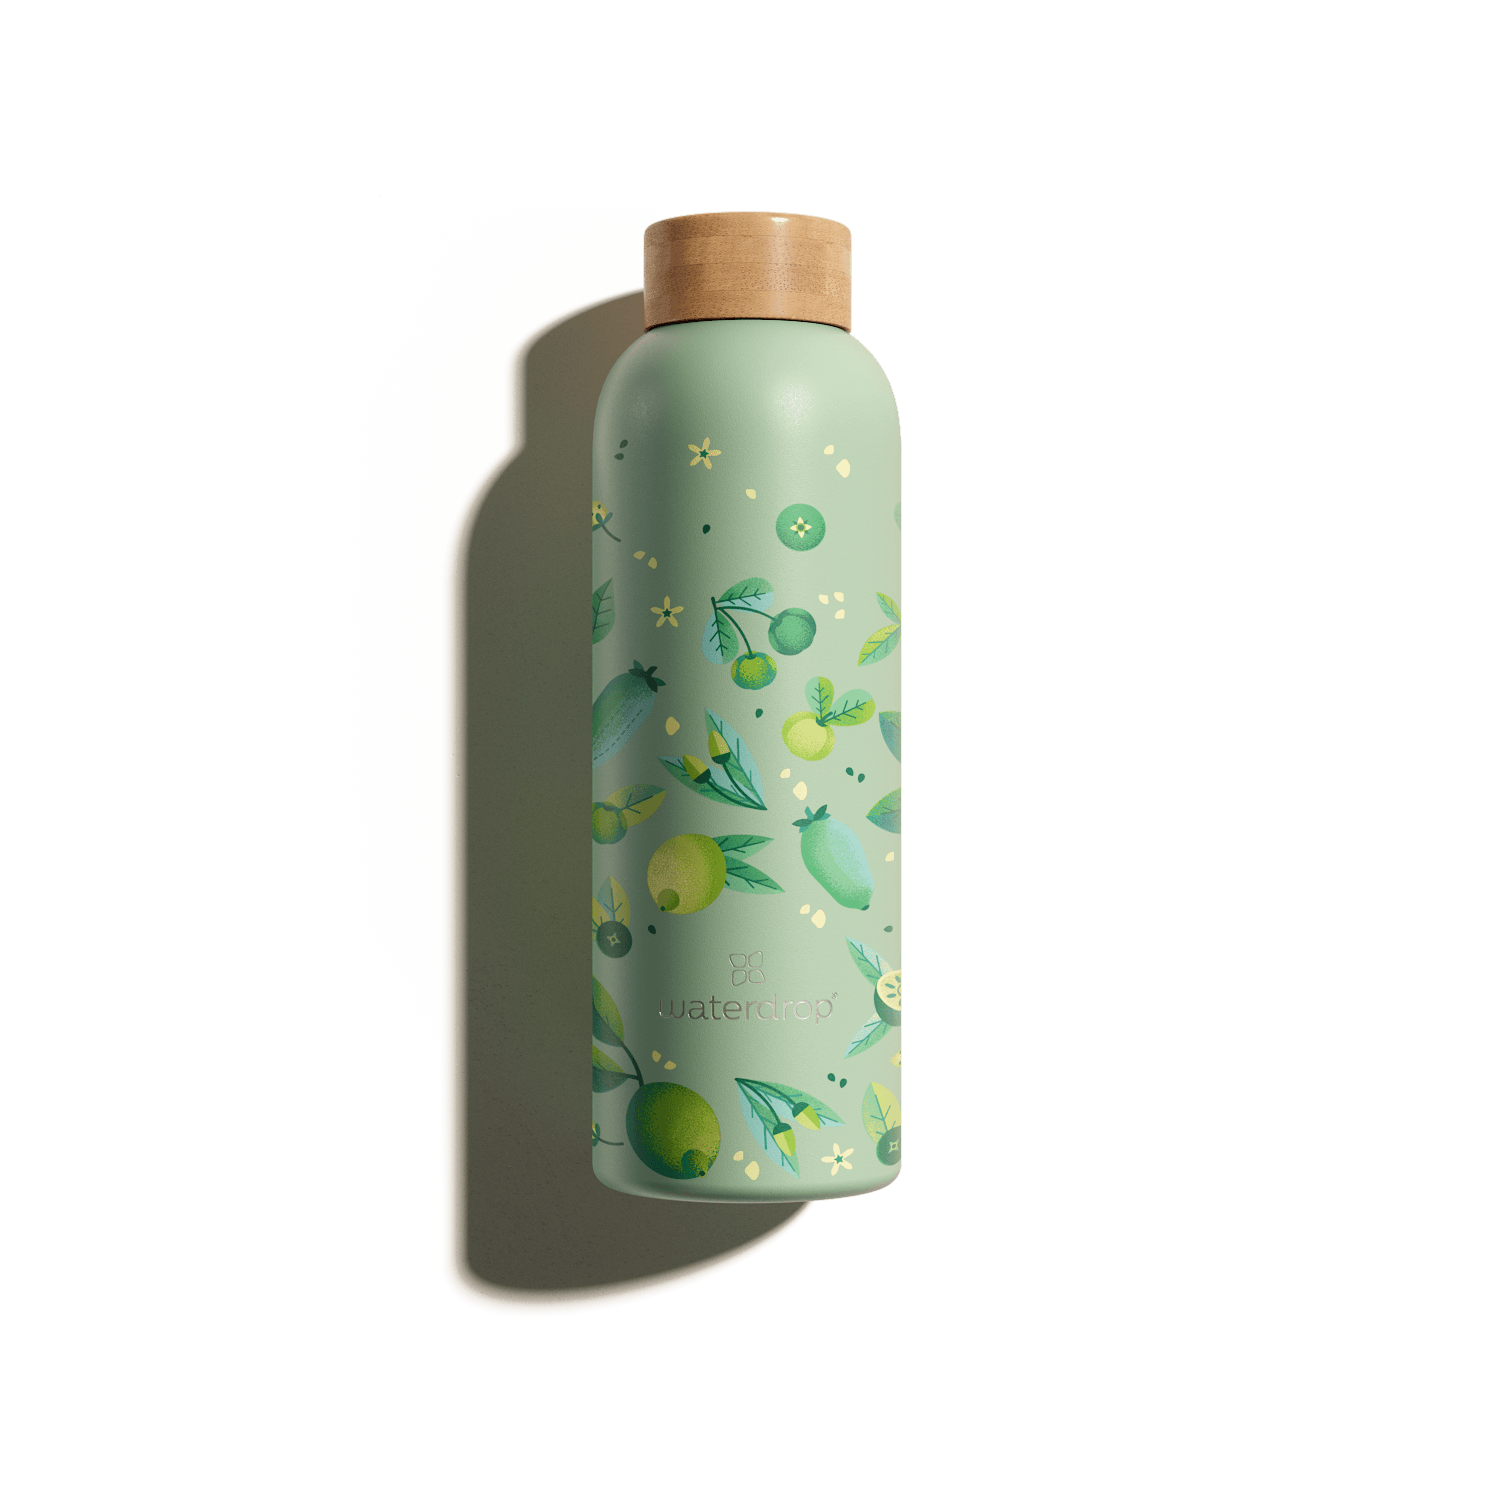 Insulated Reusable Water Bottle: Keep Your Drinks Hot or Cold